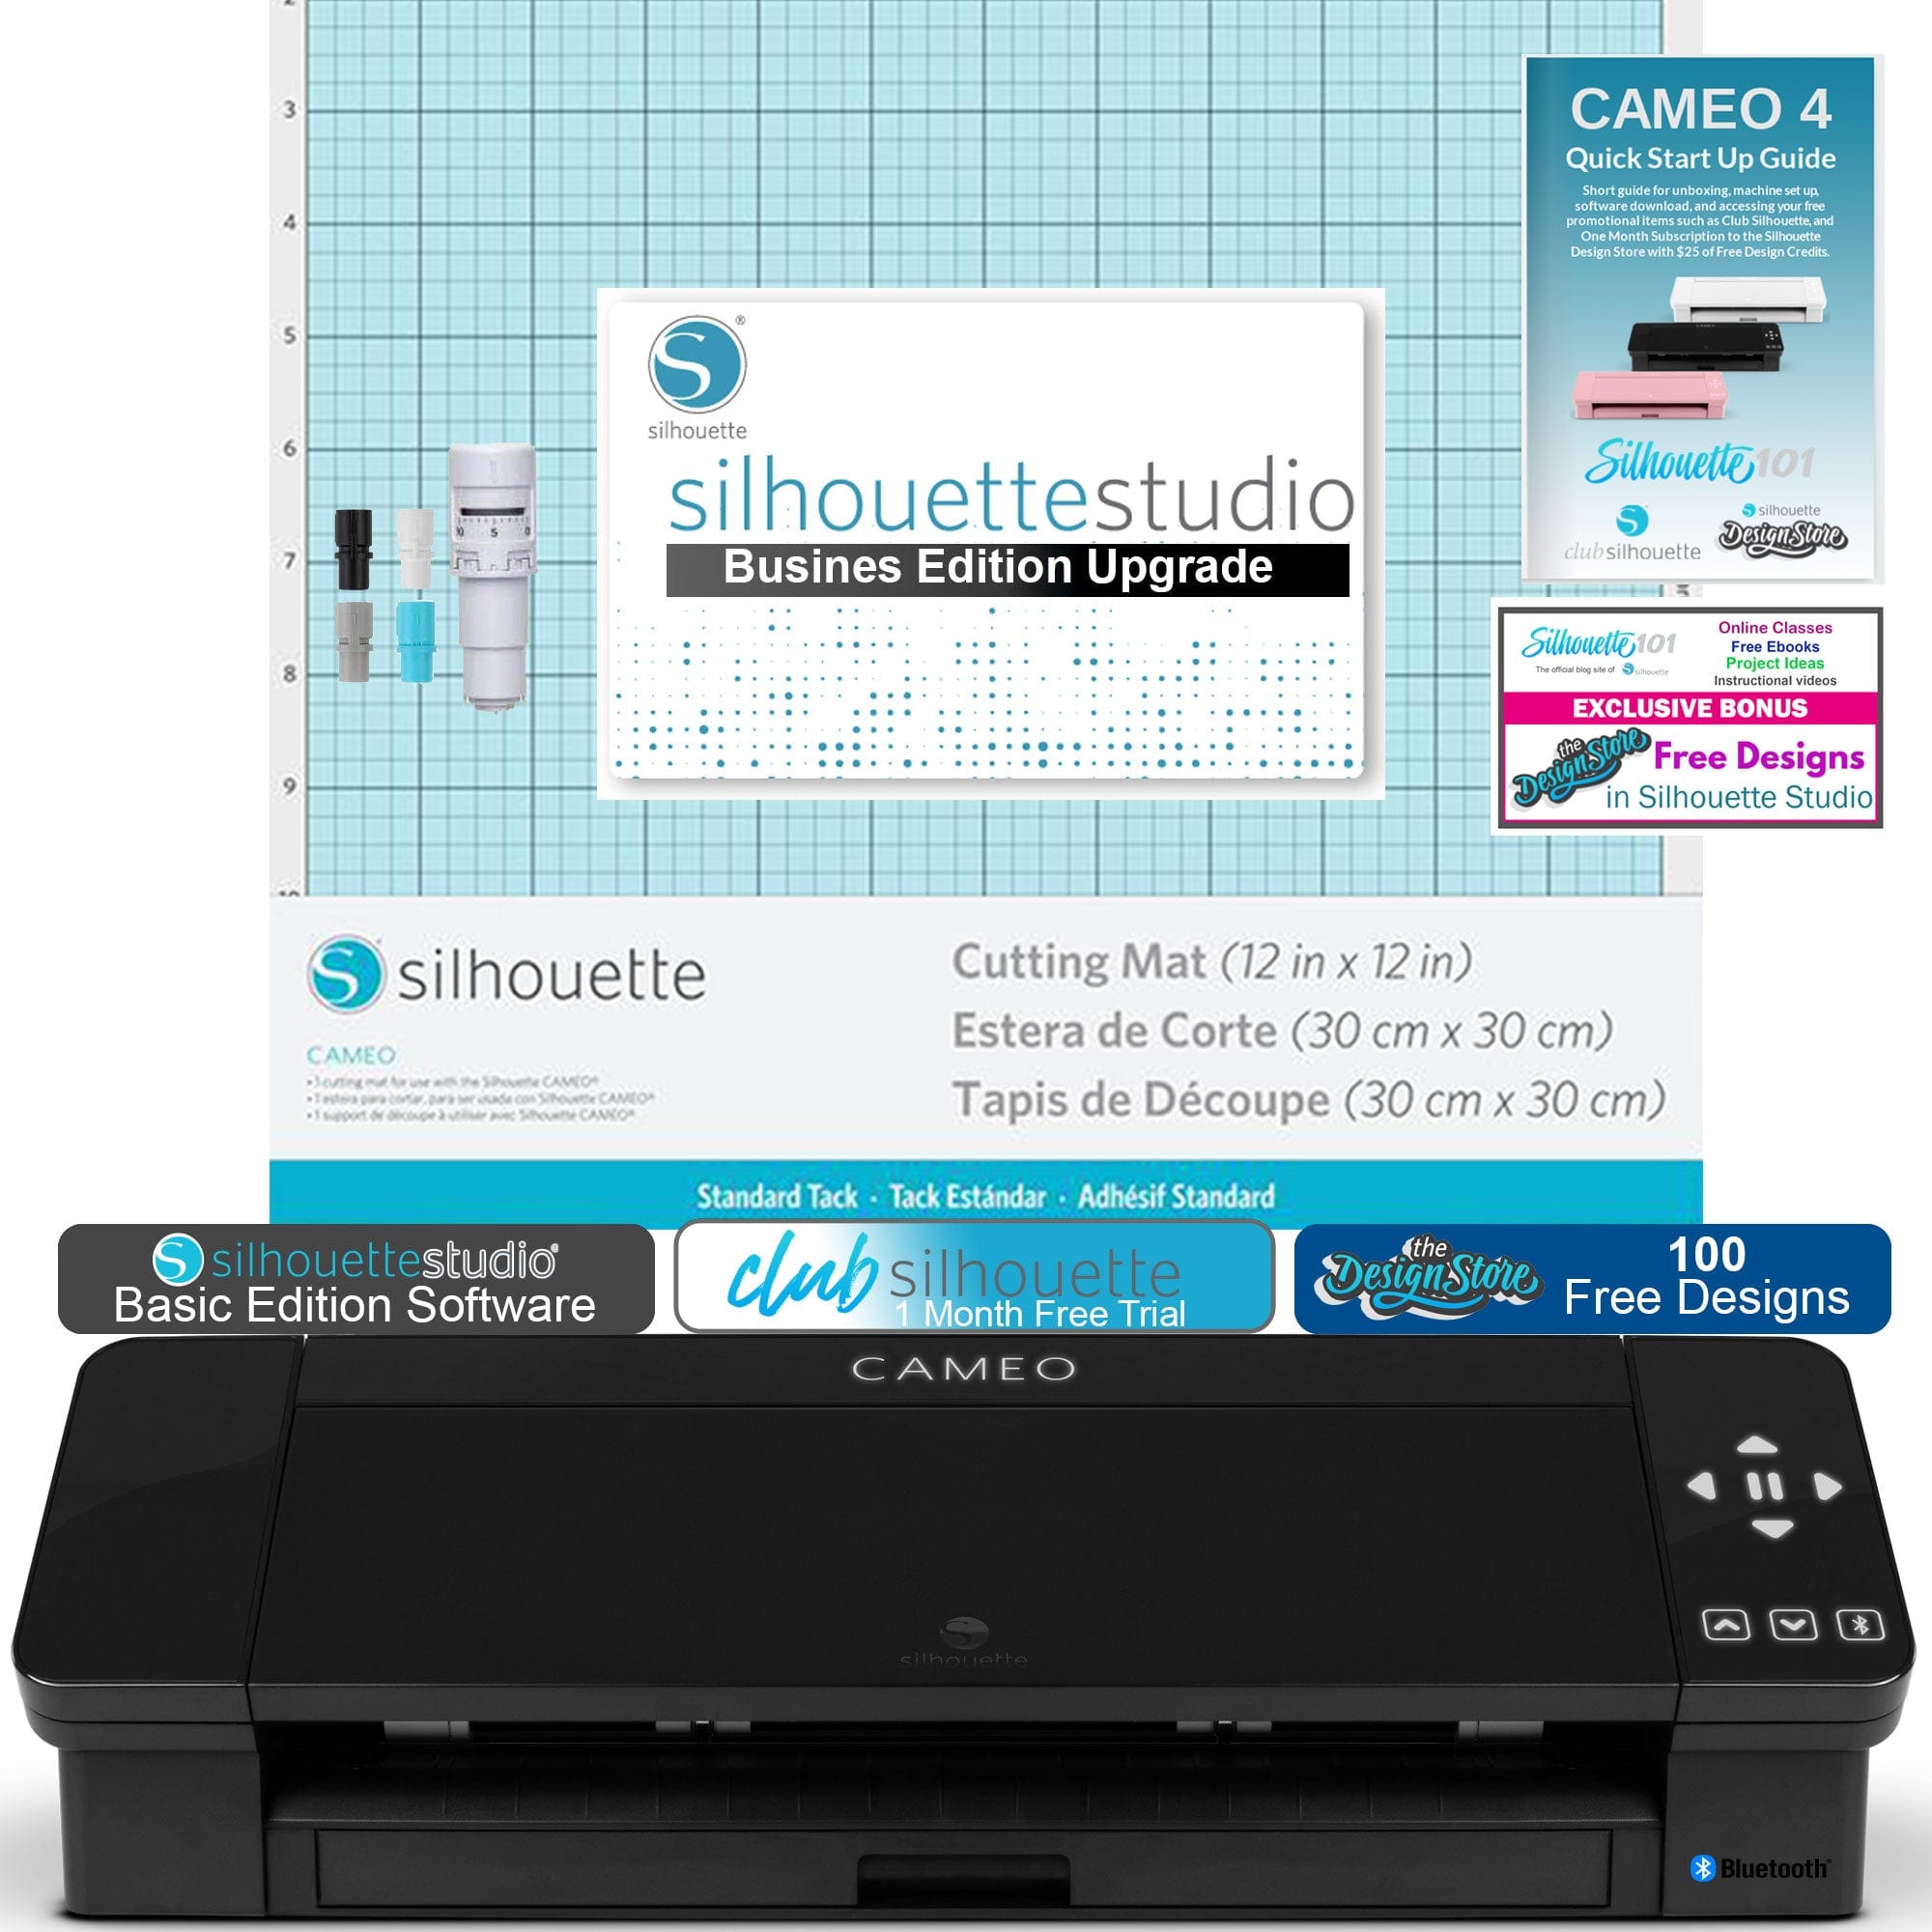 craftercuts Silhouette Cameo 4 12" Vinyl Cutting Black Edition with Silhouette Studio Business Edition Software